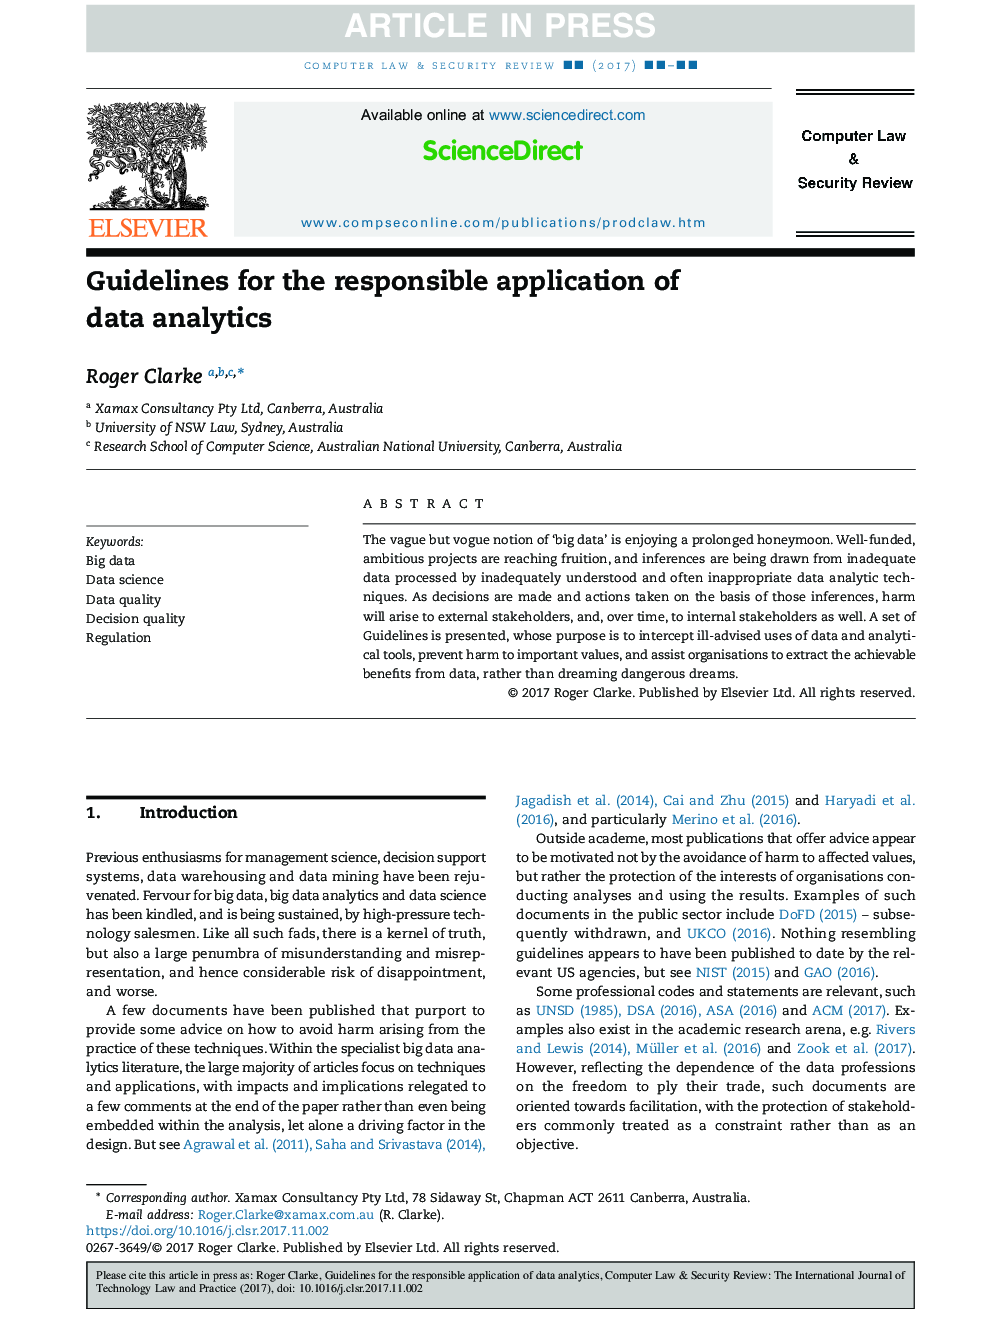 Guidelines for the responsible application of data analytics